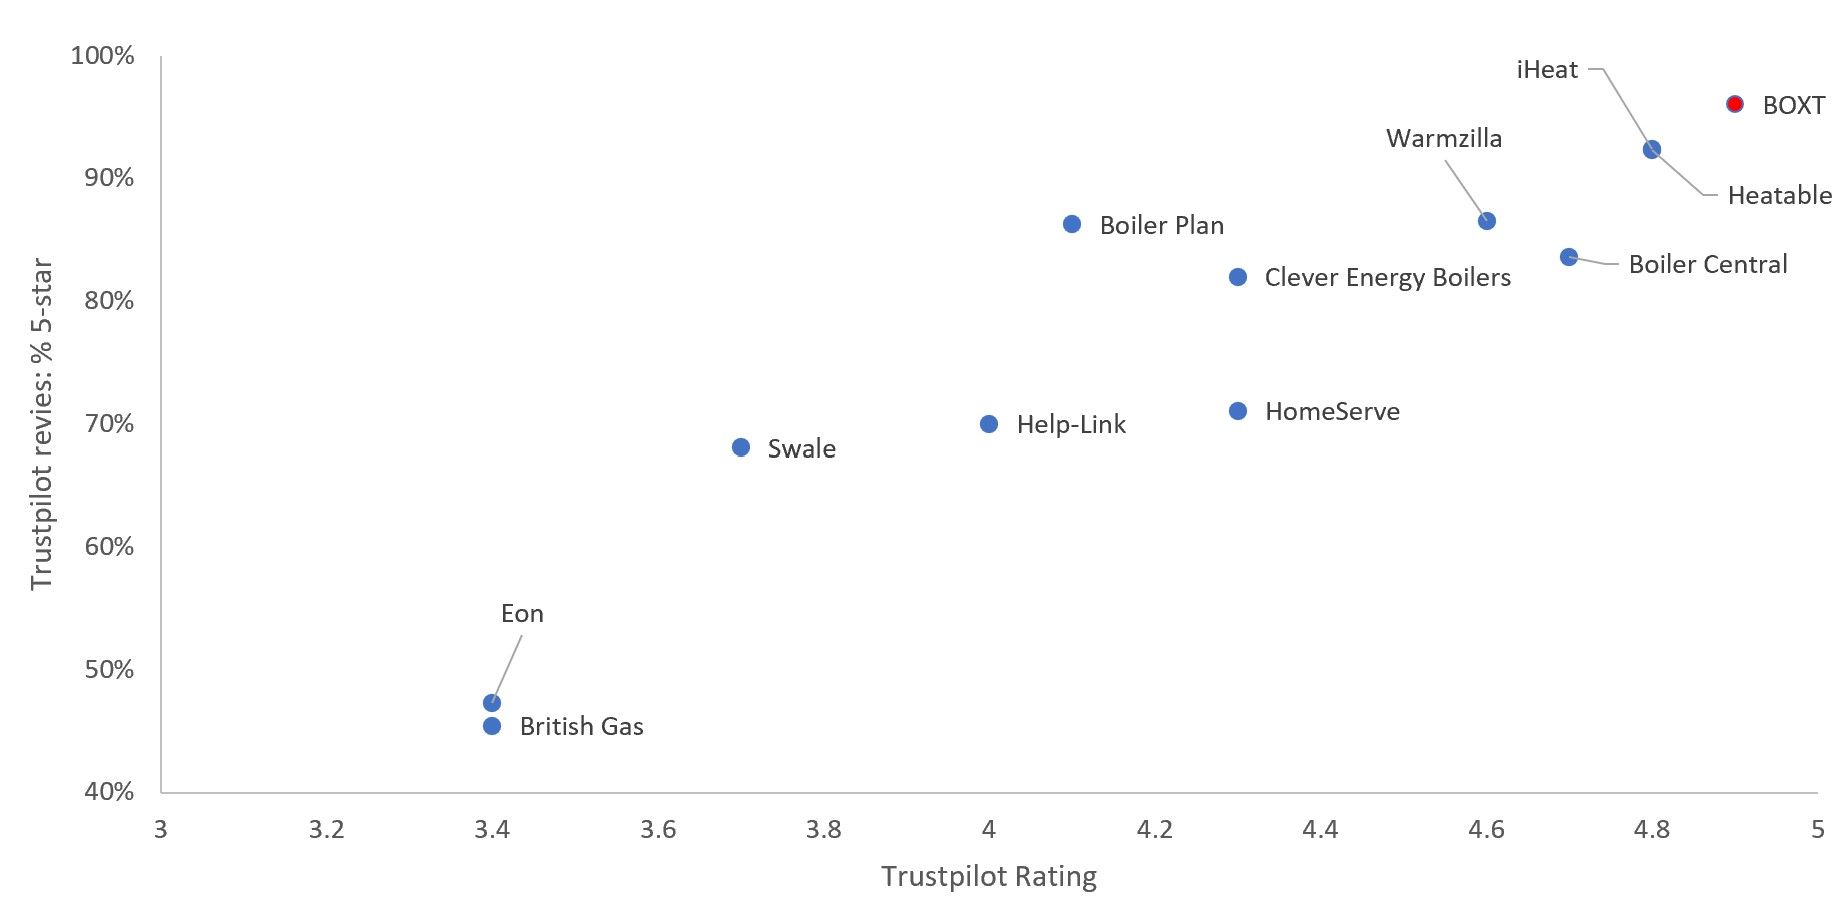 BOXT Trustpilot and percentage 5-star reviews vs. competition